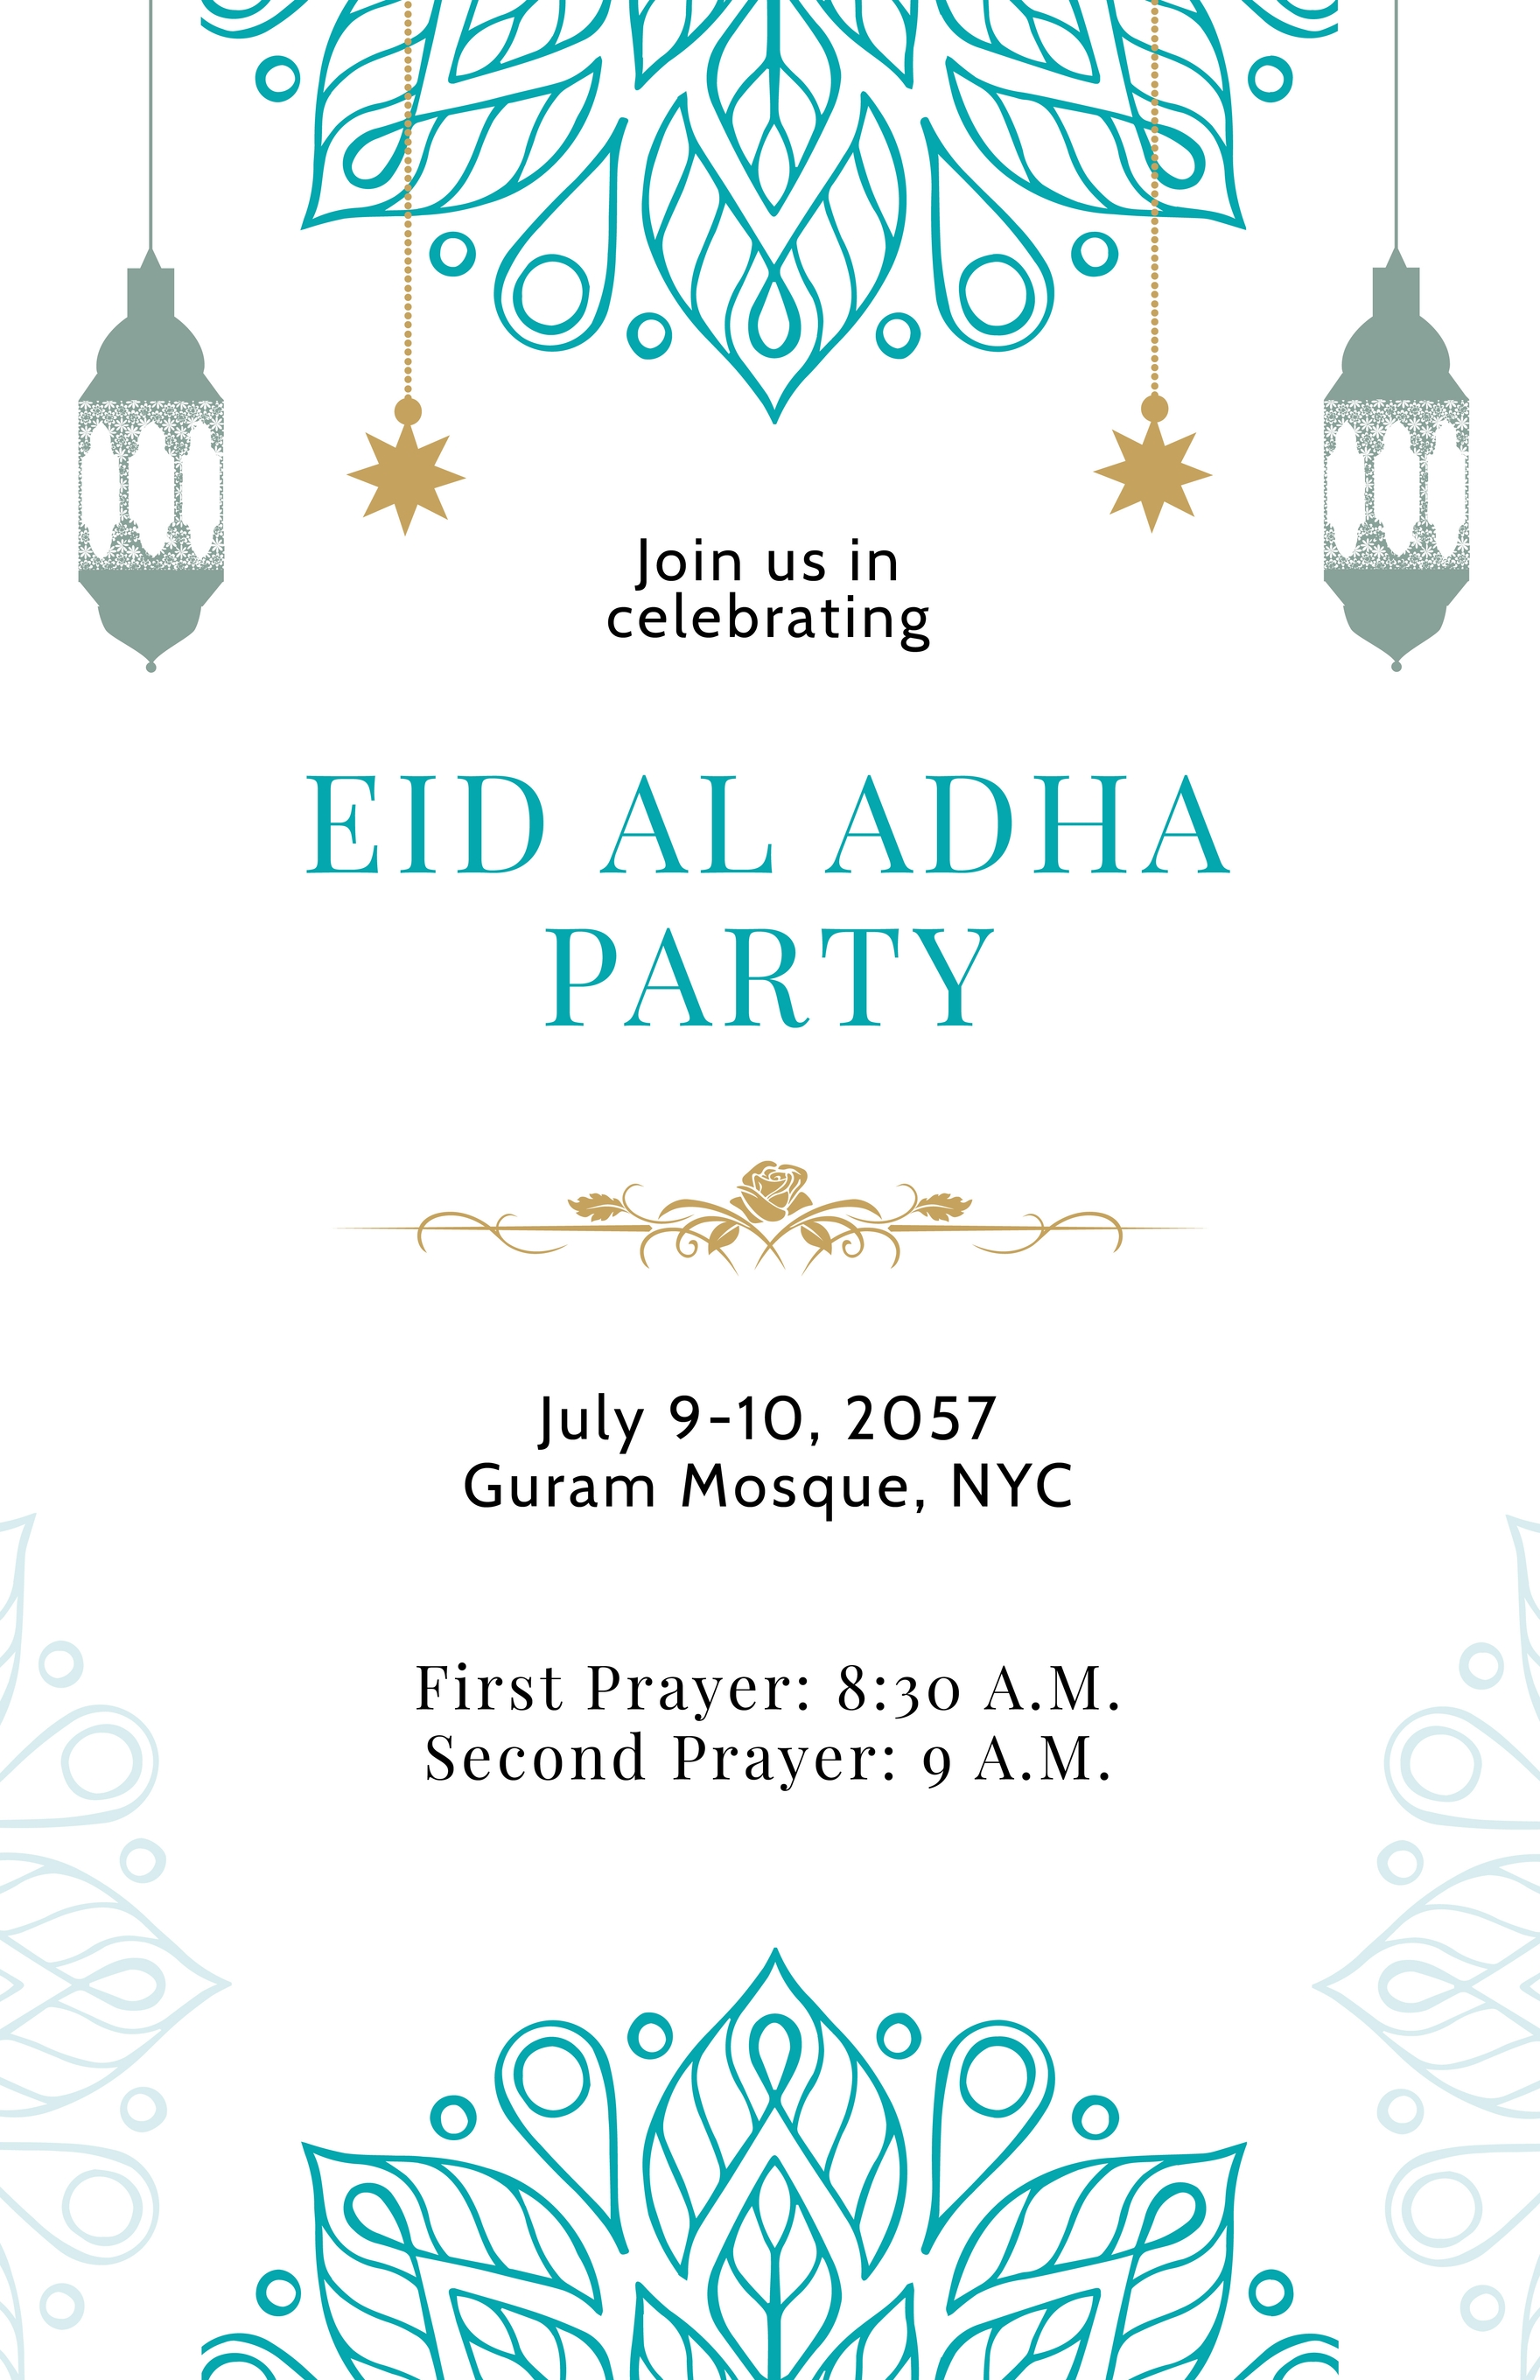 Eid Al Adha Party Poster in Word, Google Docs, Illustrator, PSD, Apple Pages, Publisher